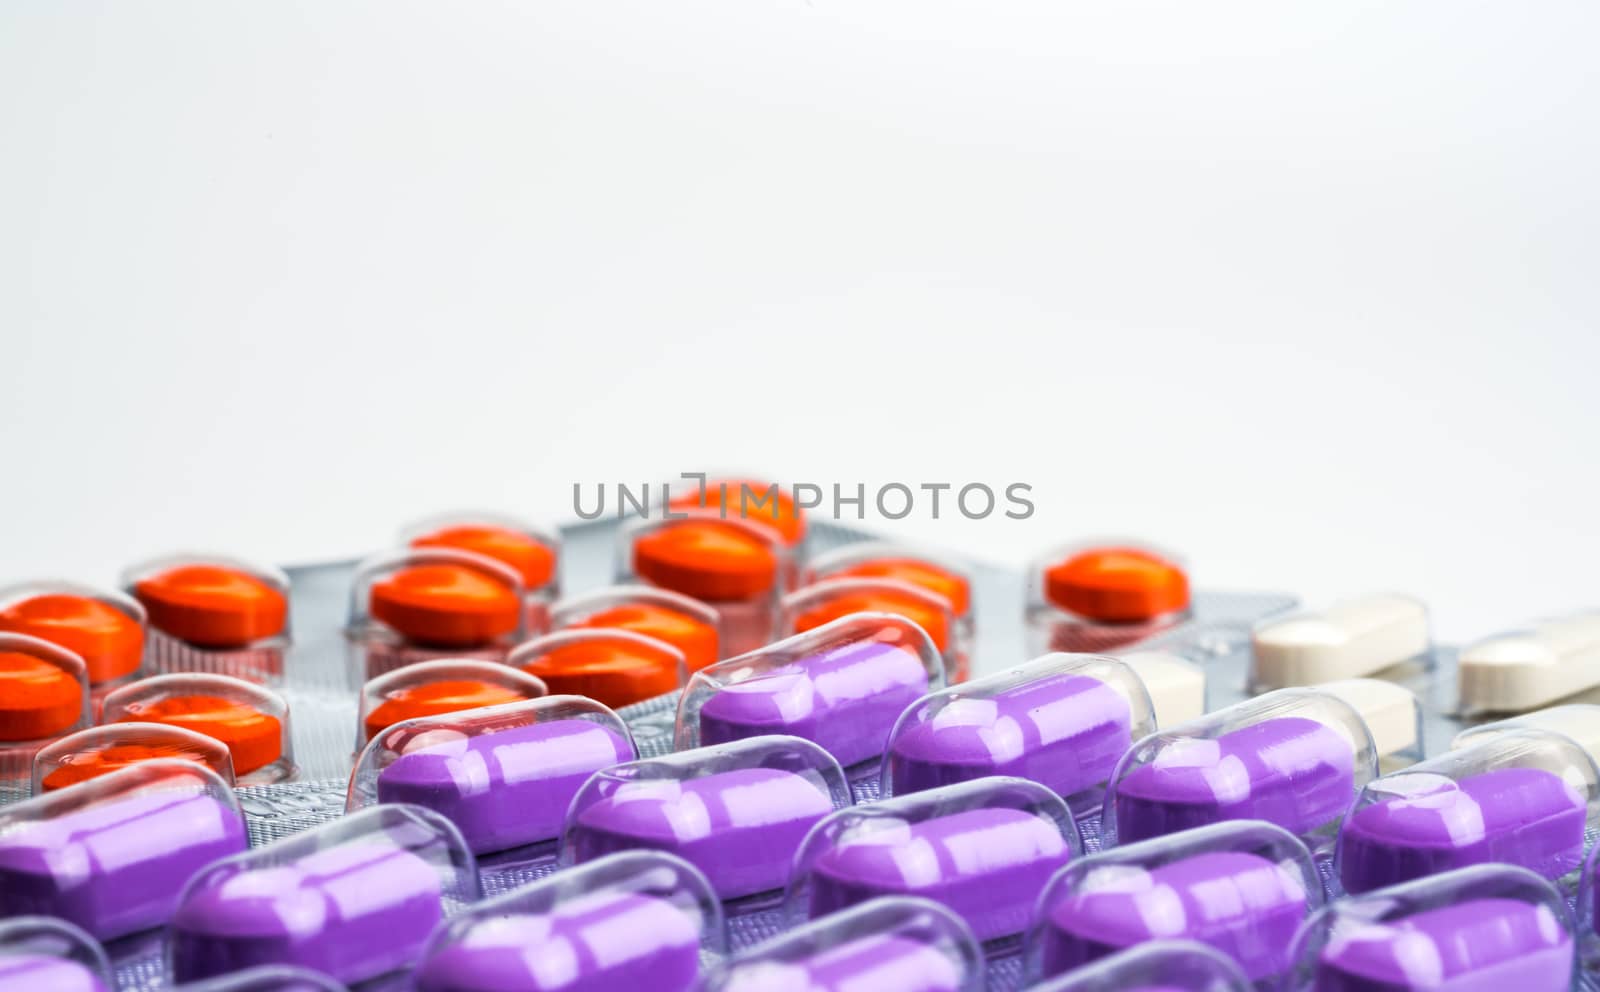 Macro shot detail of orange, purple and white tablets pills in blister pack on white background. Colorful medicine for relieve pain. NSAIDs drug for anti-inflammation can cause gastric ulcer. Pharmaceutical packaging industry. Pharmacy background. Global healthcare concept.